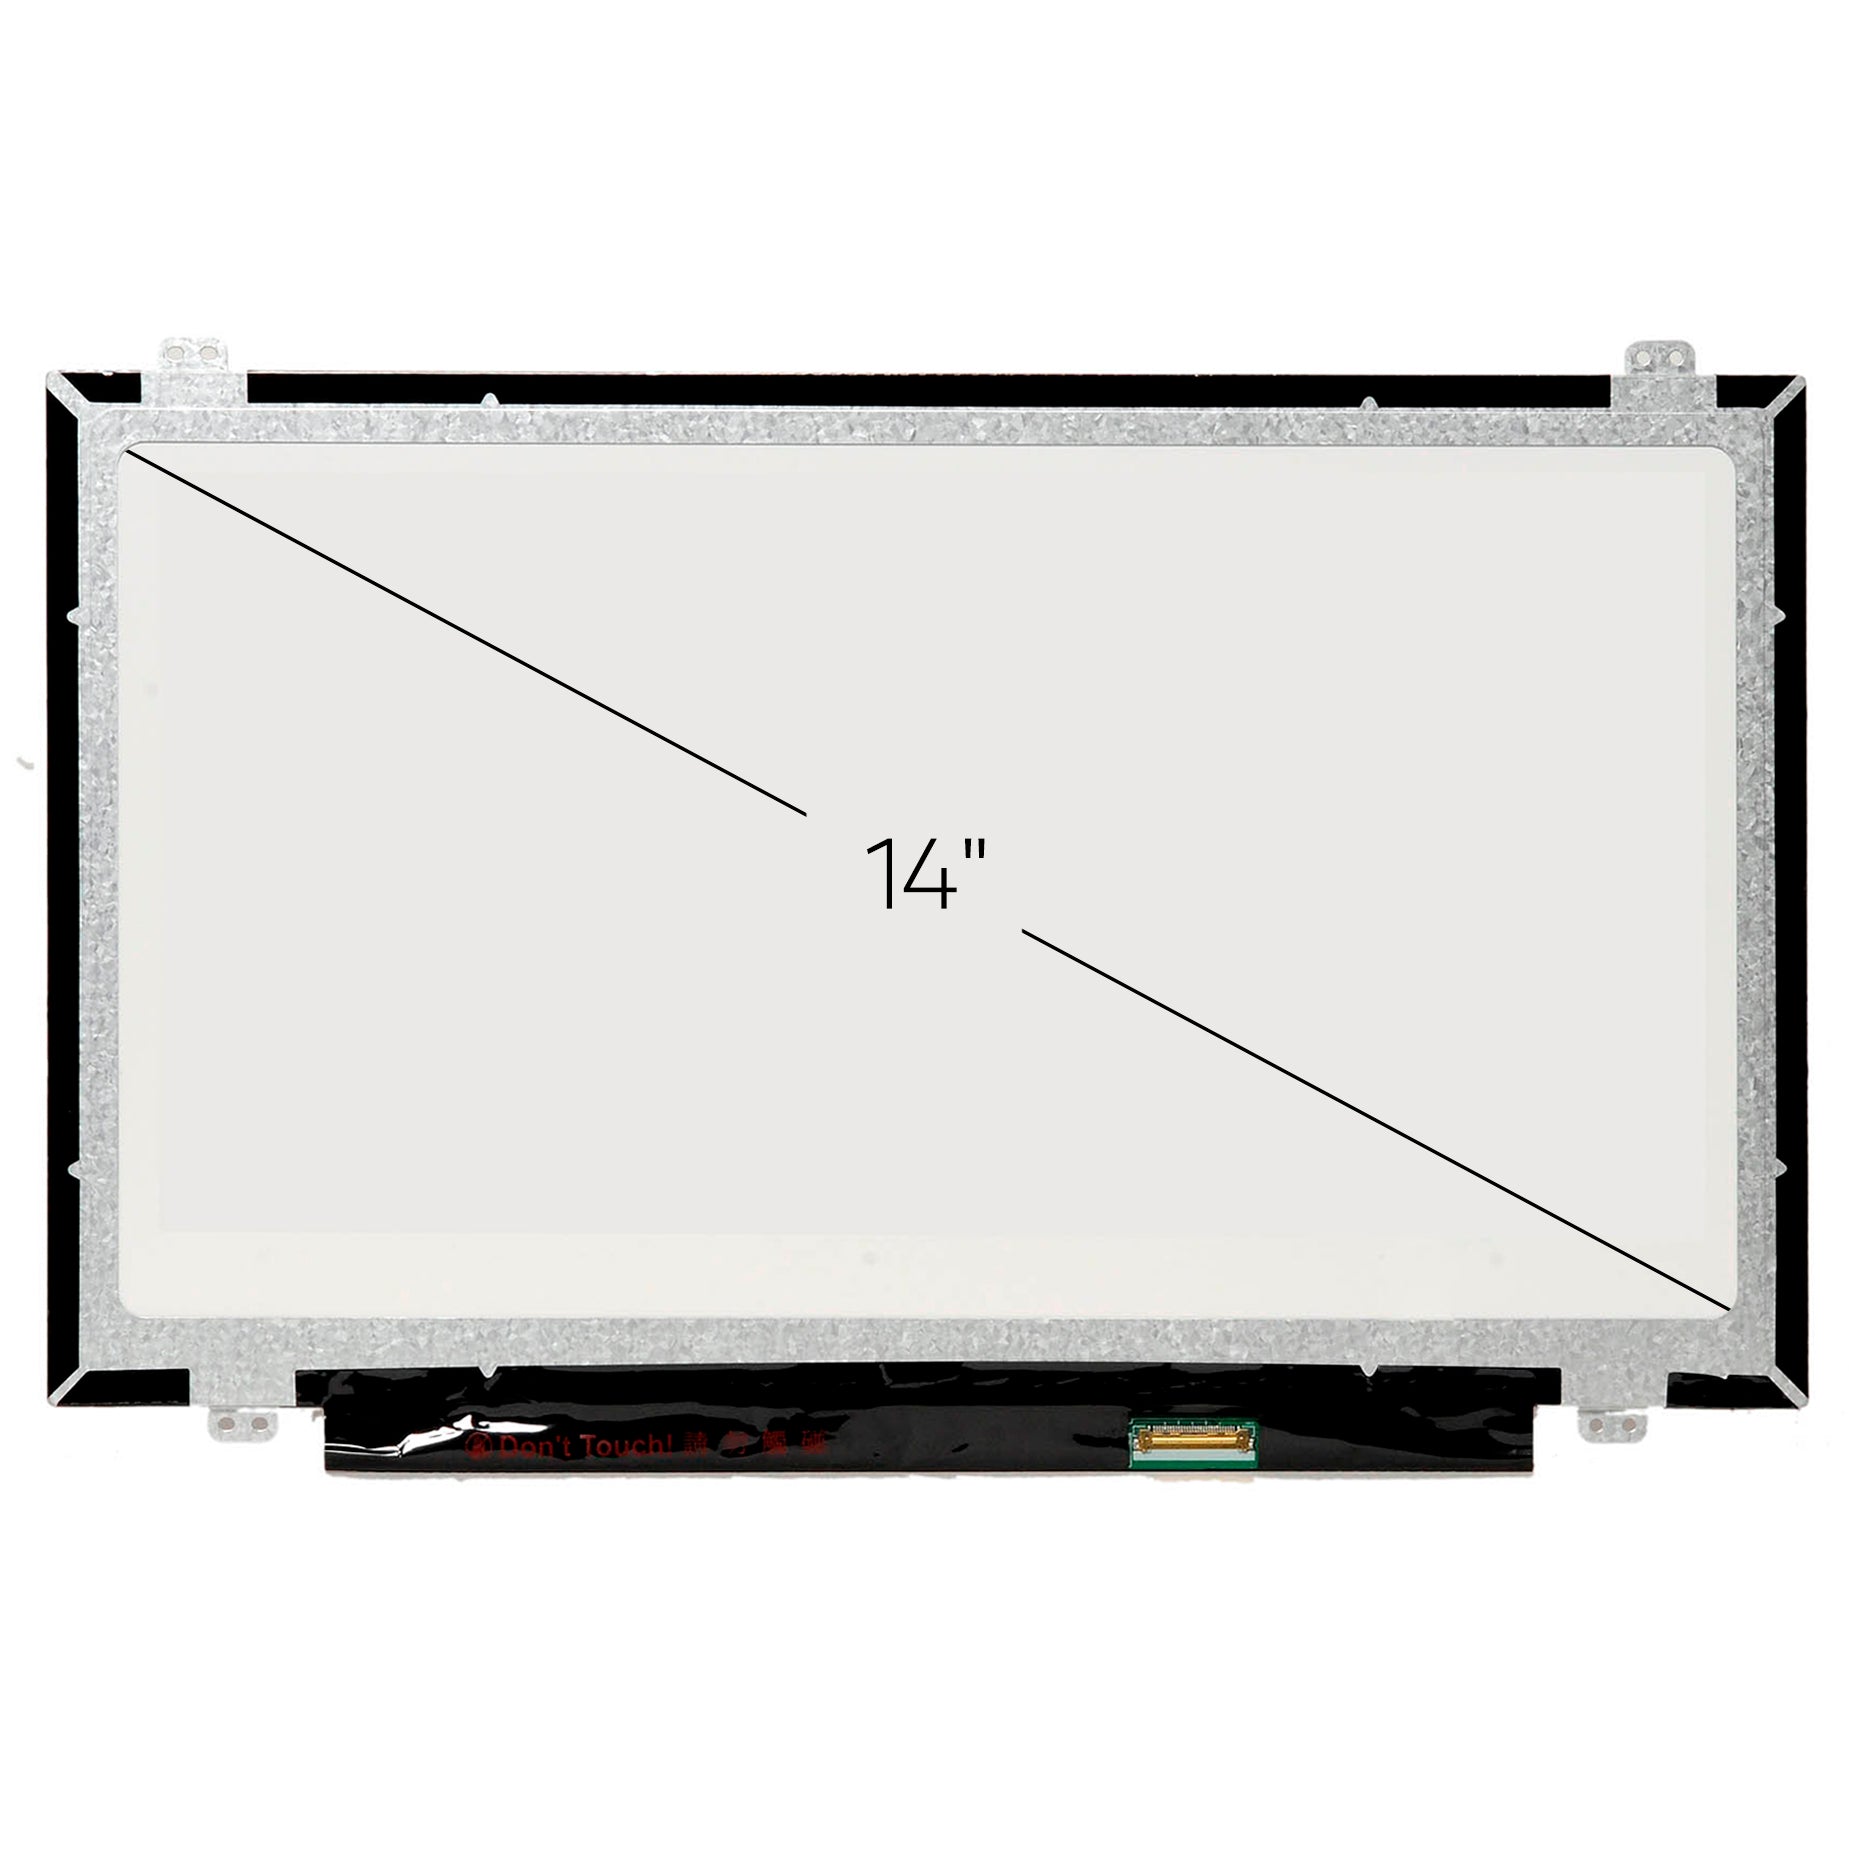 Screen Replacement for HP Elitebook 840 G4 HD 1366x768 Glossy LCD LED Display